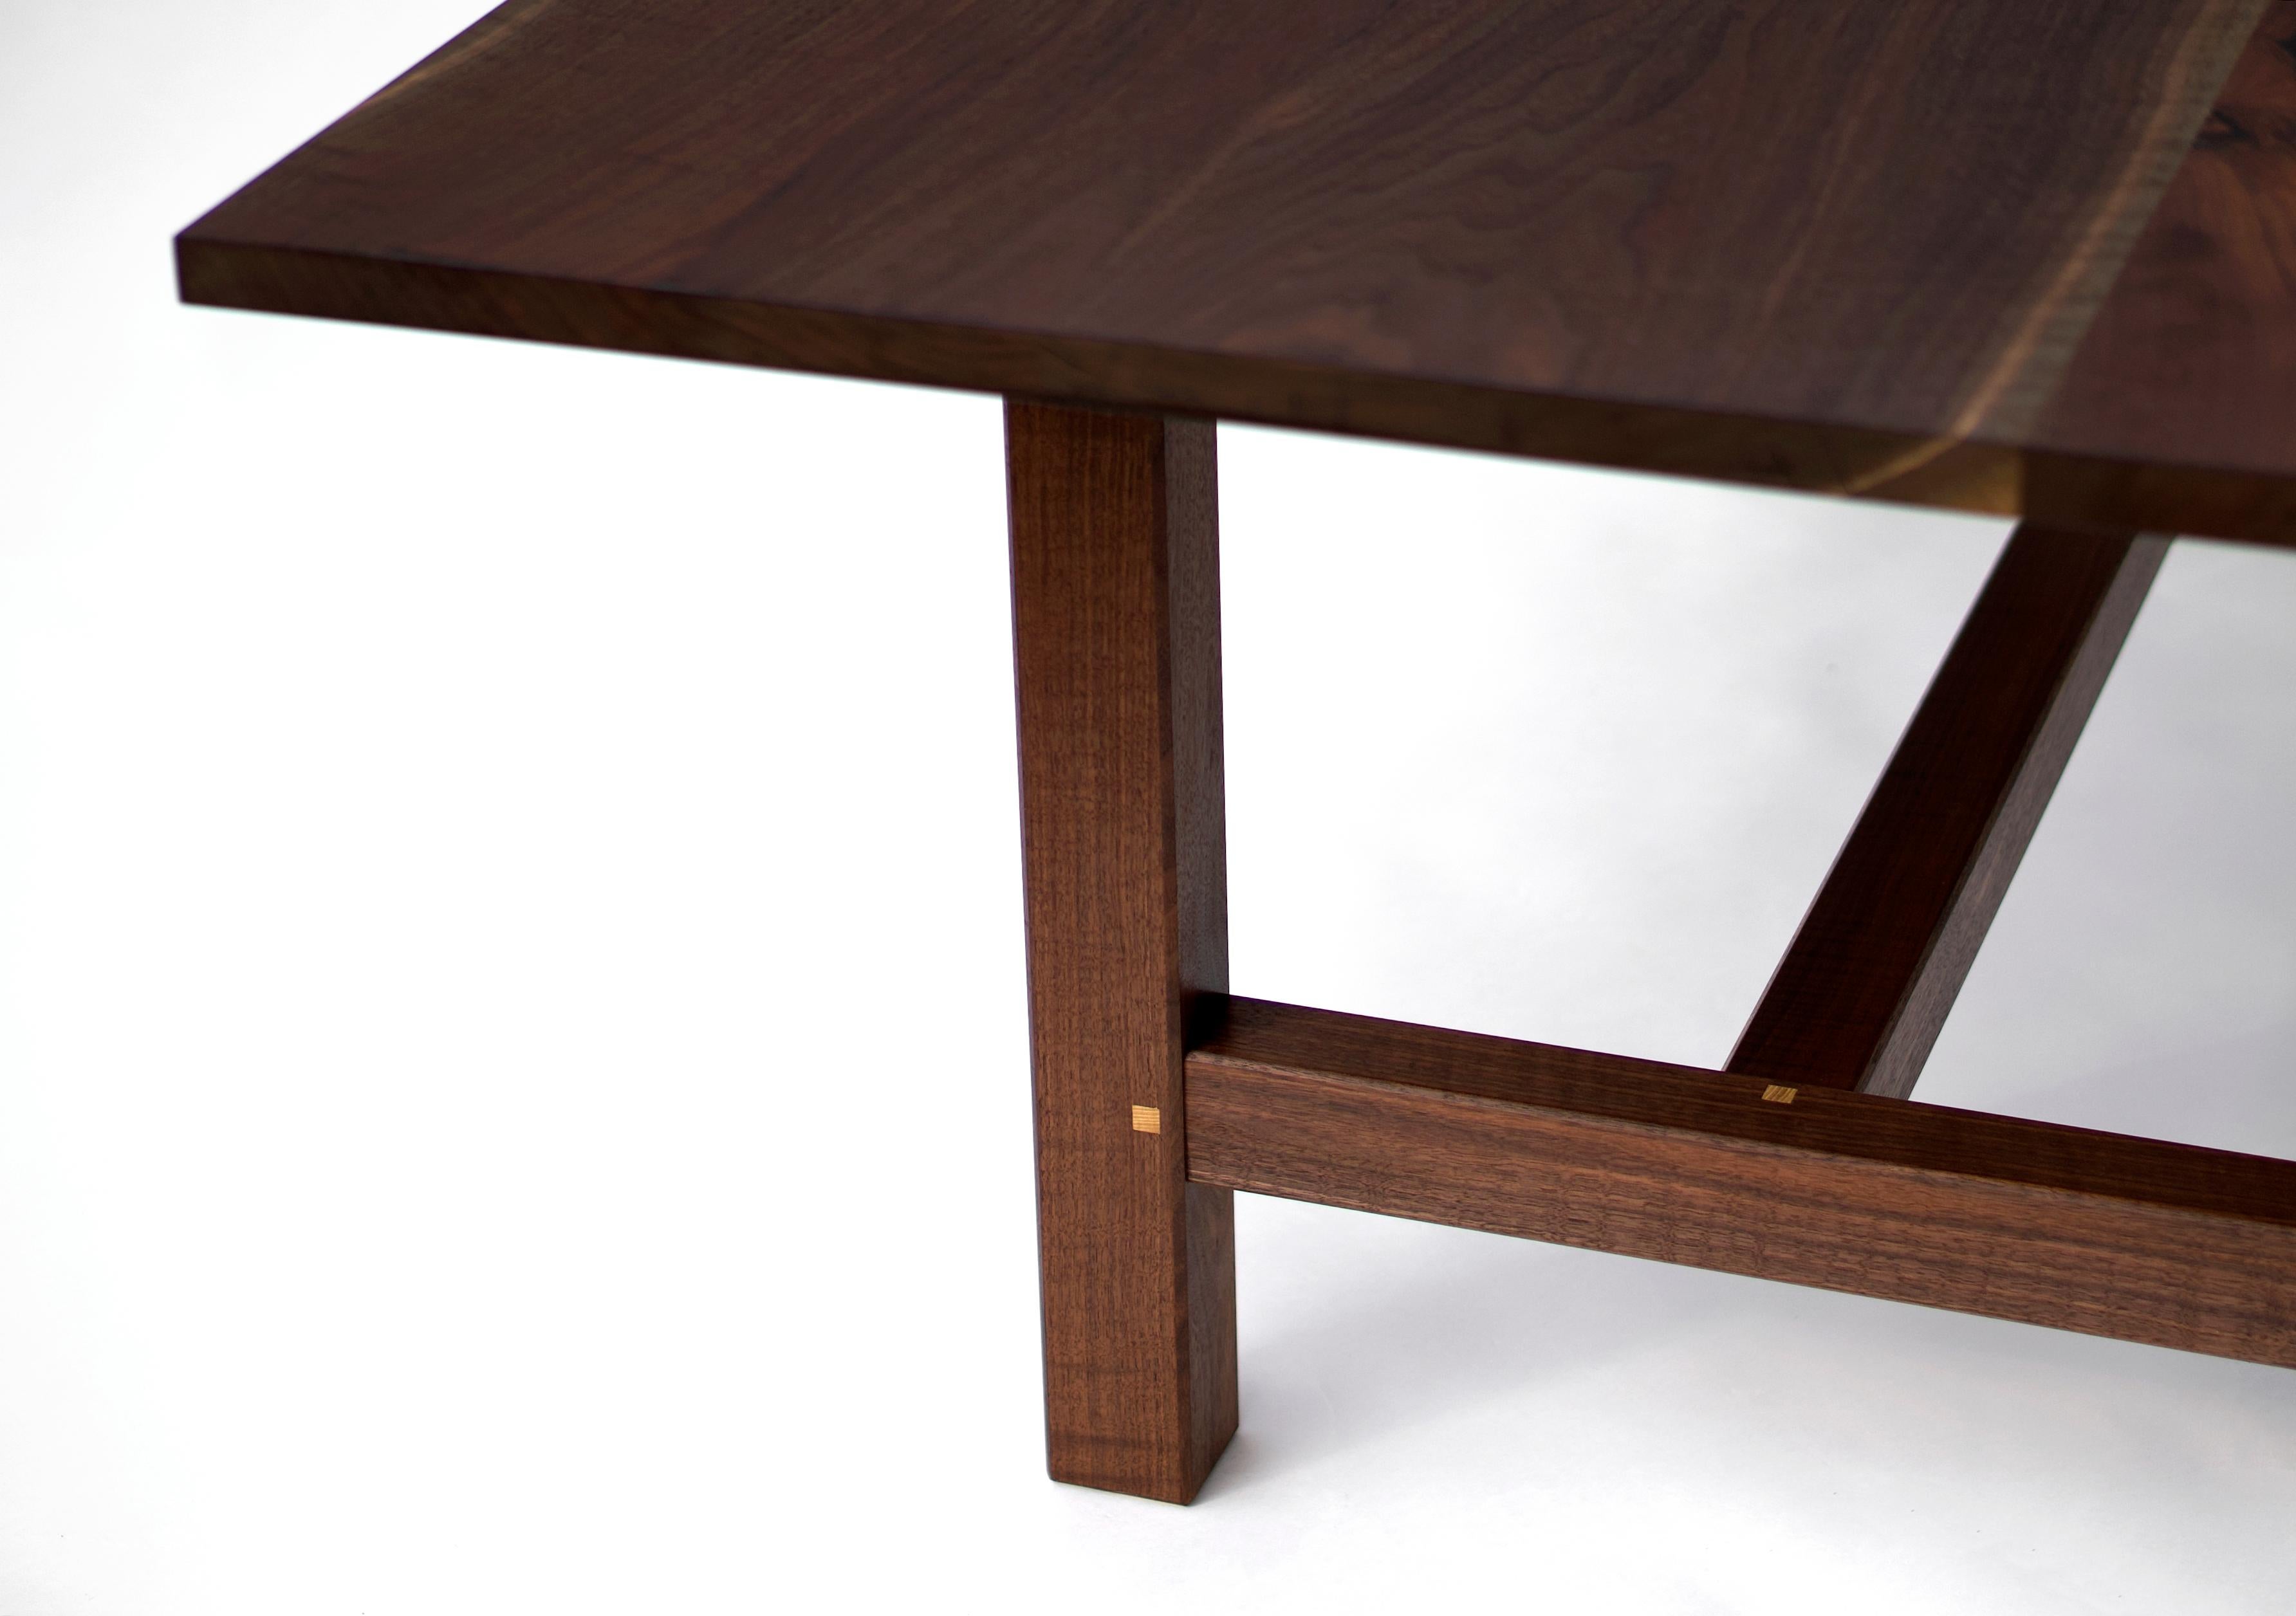 Trestle Leg Dining Table in Oiled Walnut In New Condition For Sale In Princeton, NJ